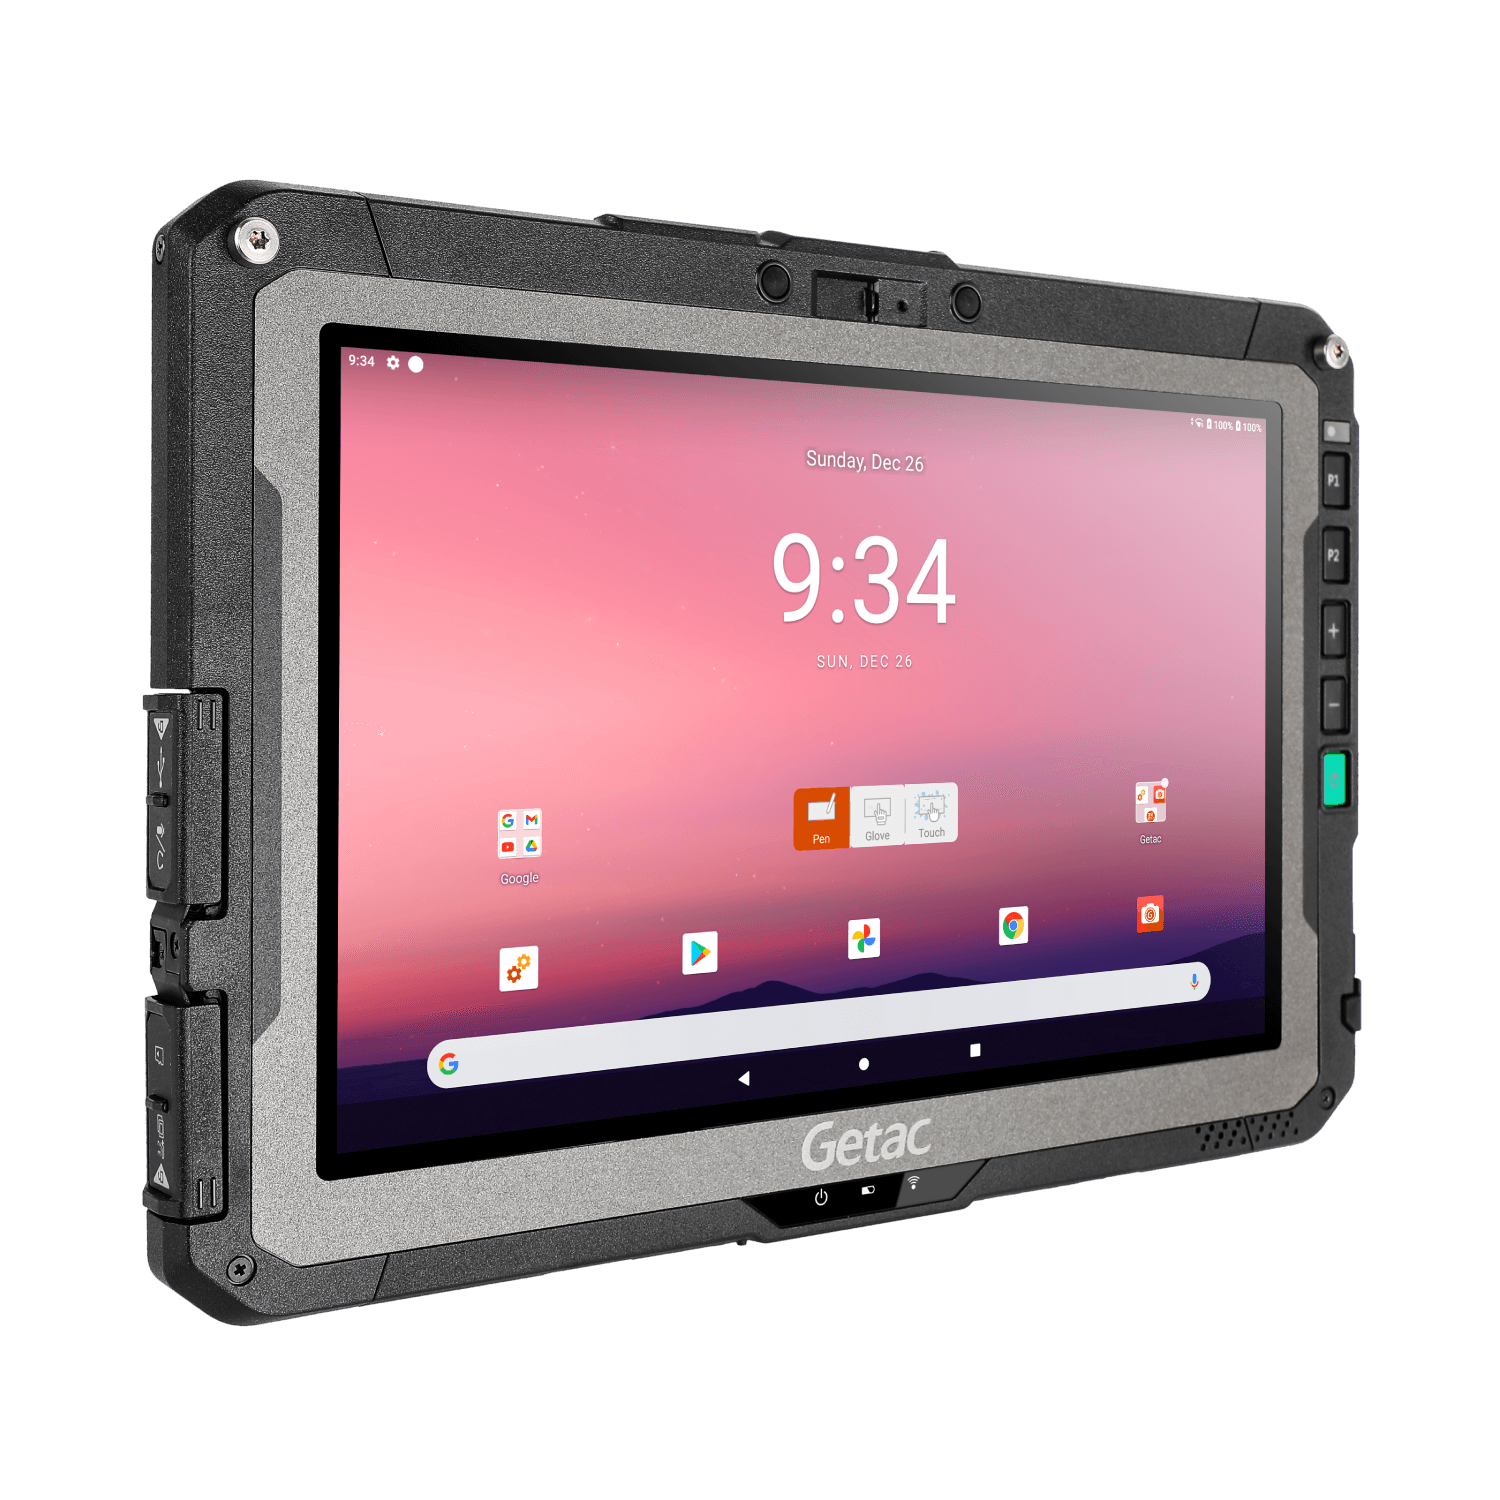 Getac_ZX10_RUGGED ANDROID VERSATILITY